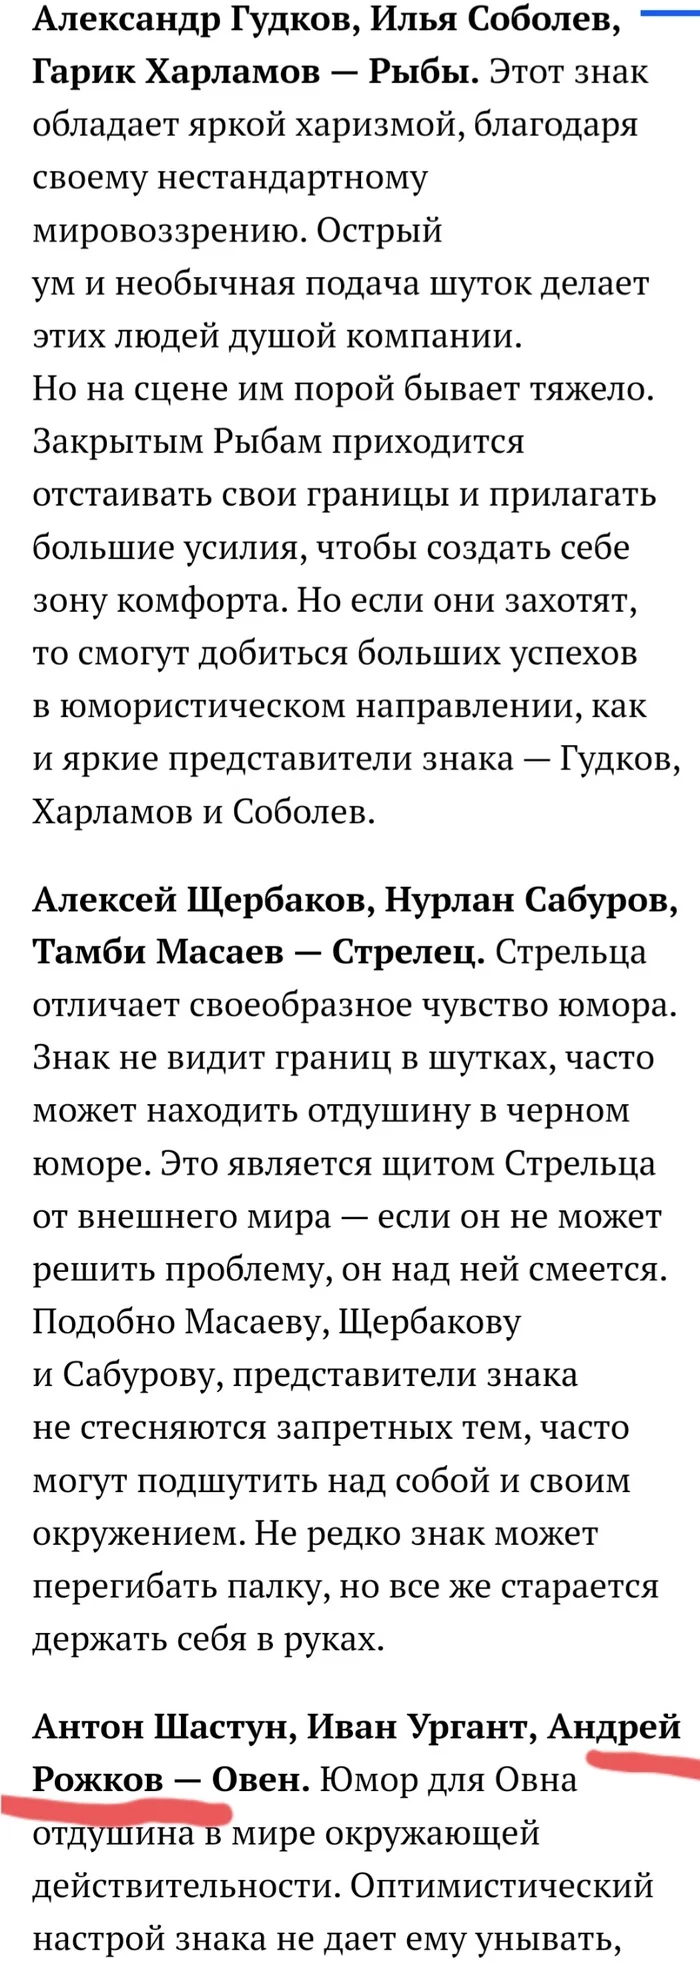 Andrei Rozhkov among these names is as appropriate as the word khokhma in the list of youth slang - My, KVN, Ivan Urgant, Ural dumplings, Media and press, Longpost